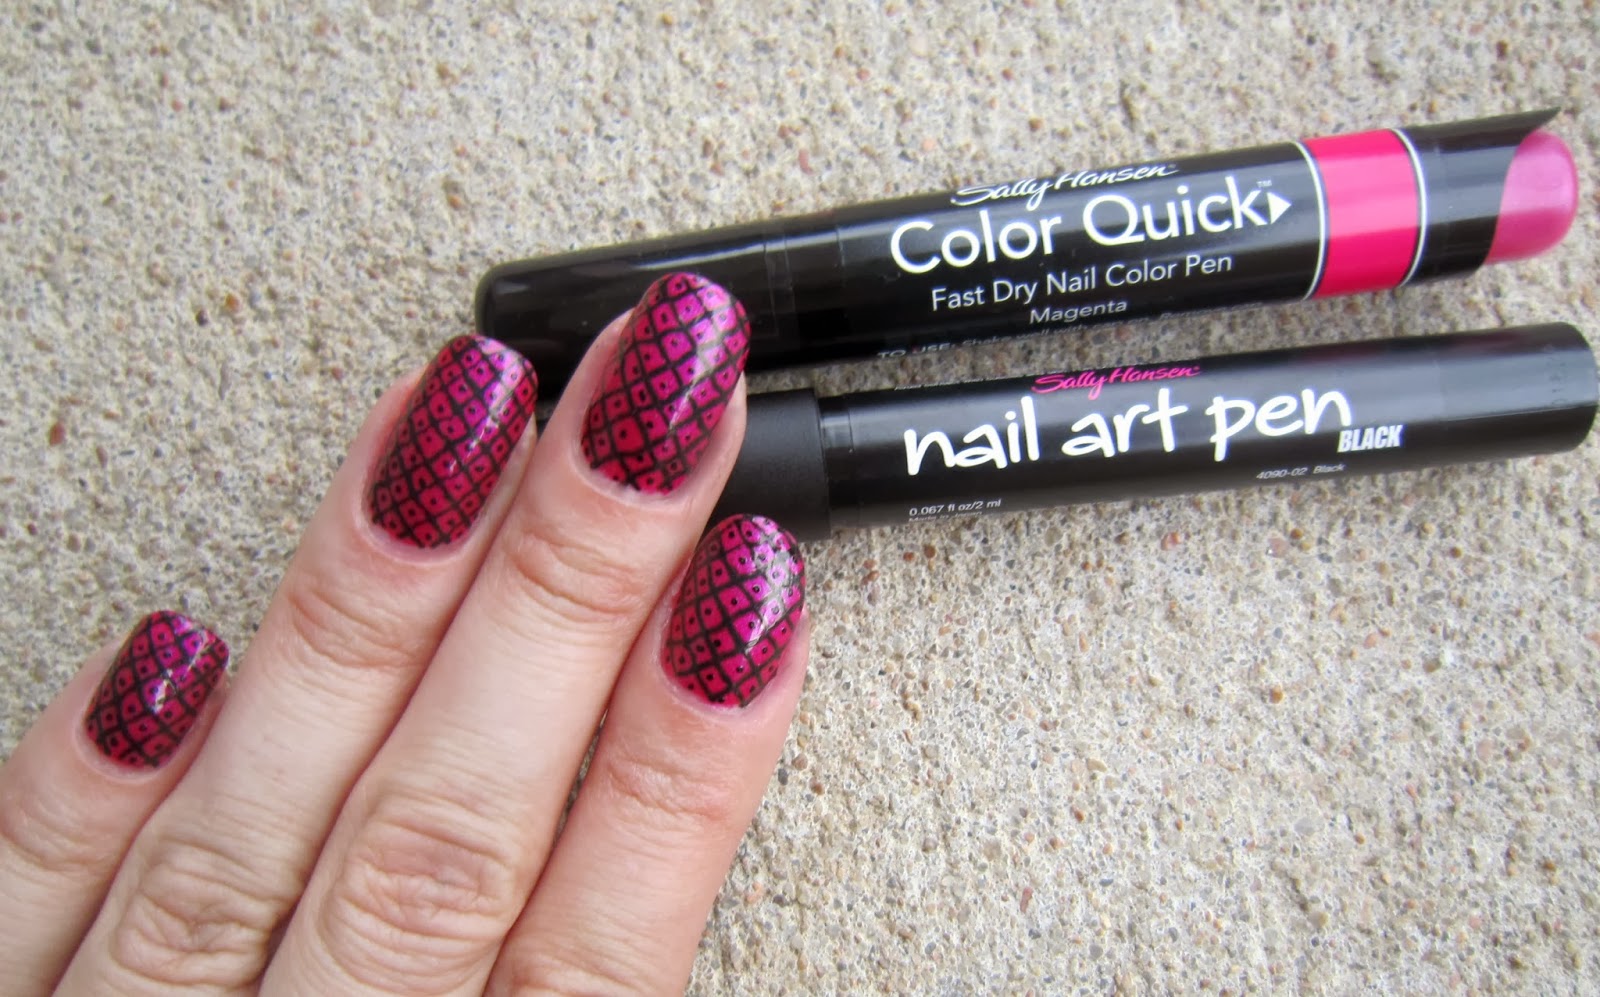 5. Tips for Getting the Most Out of Your Sally Hansen Nail Art Pen - wide 2